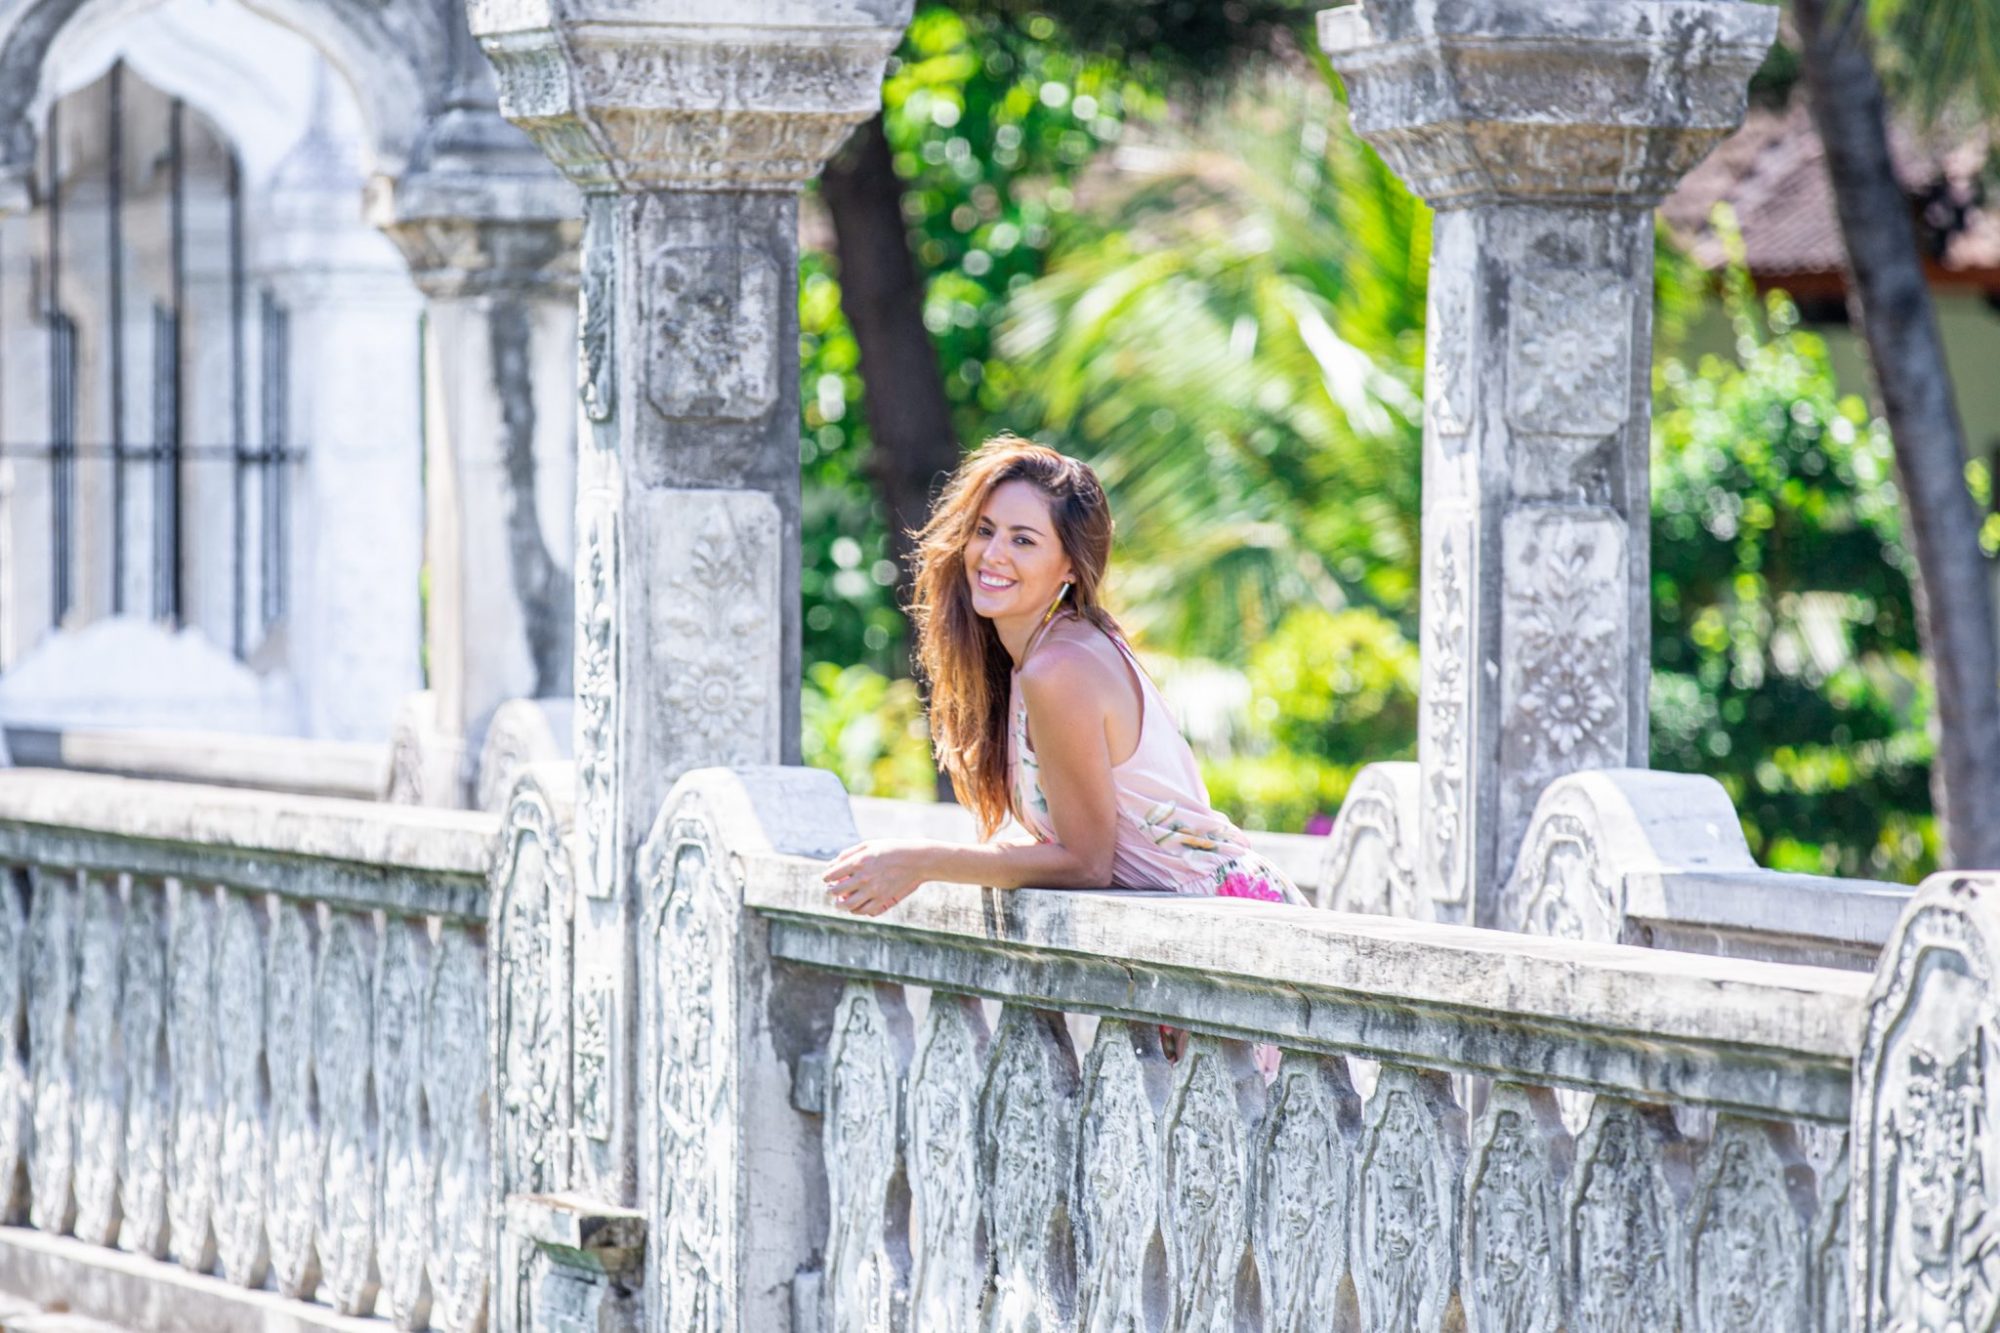 taman ujung water palace in bali, what to do in bali, where to go in bali, day tours from ubud, day trips from ubud, water palaces in bali, best places to visit in bali, Plum Pretty Sugar Ashley High Neck Floral Maxi Dress, Plum Pretty Sugar Ashley dress in heartbreaker